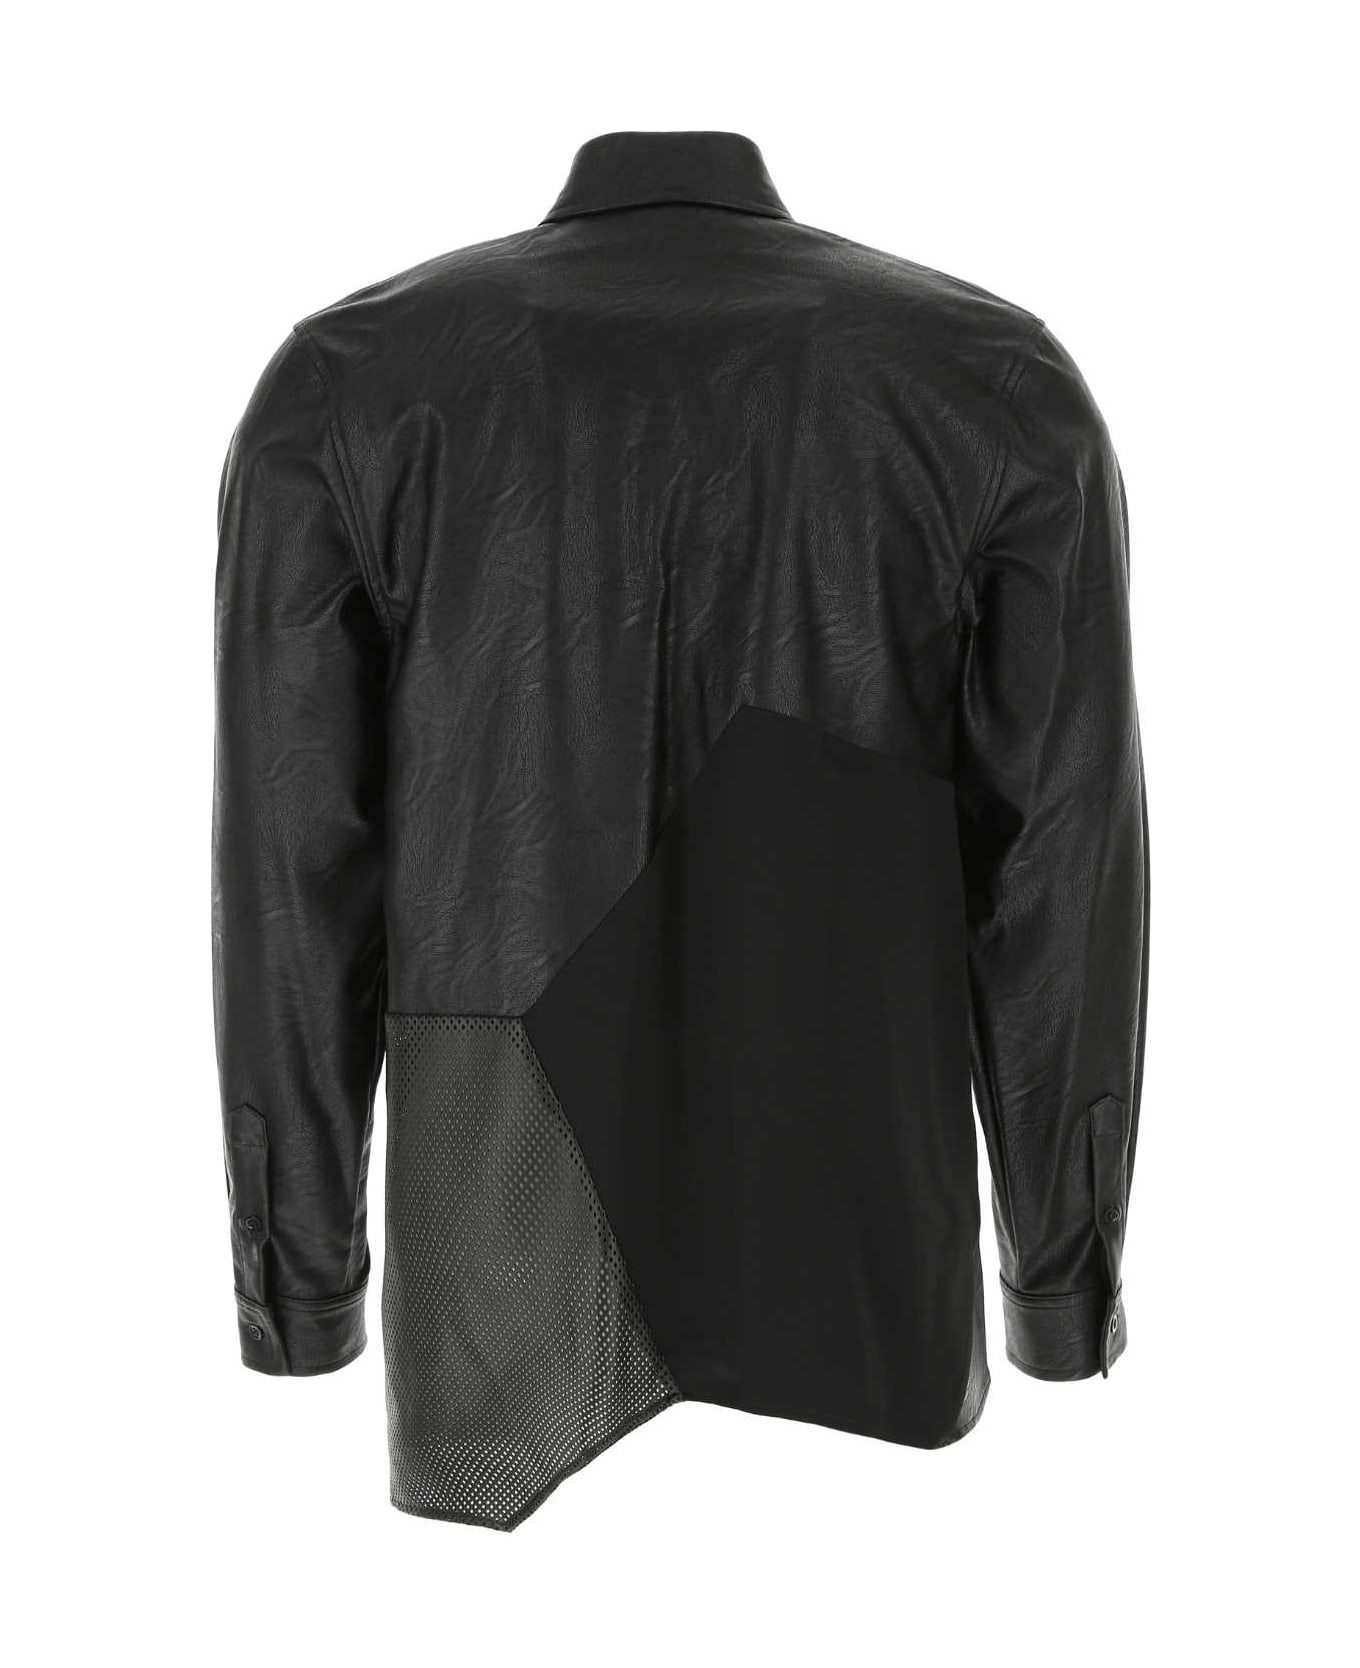 Koché Black Synthetic Leather And Satin Shirt - 900 シャツ